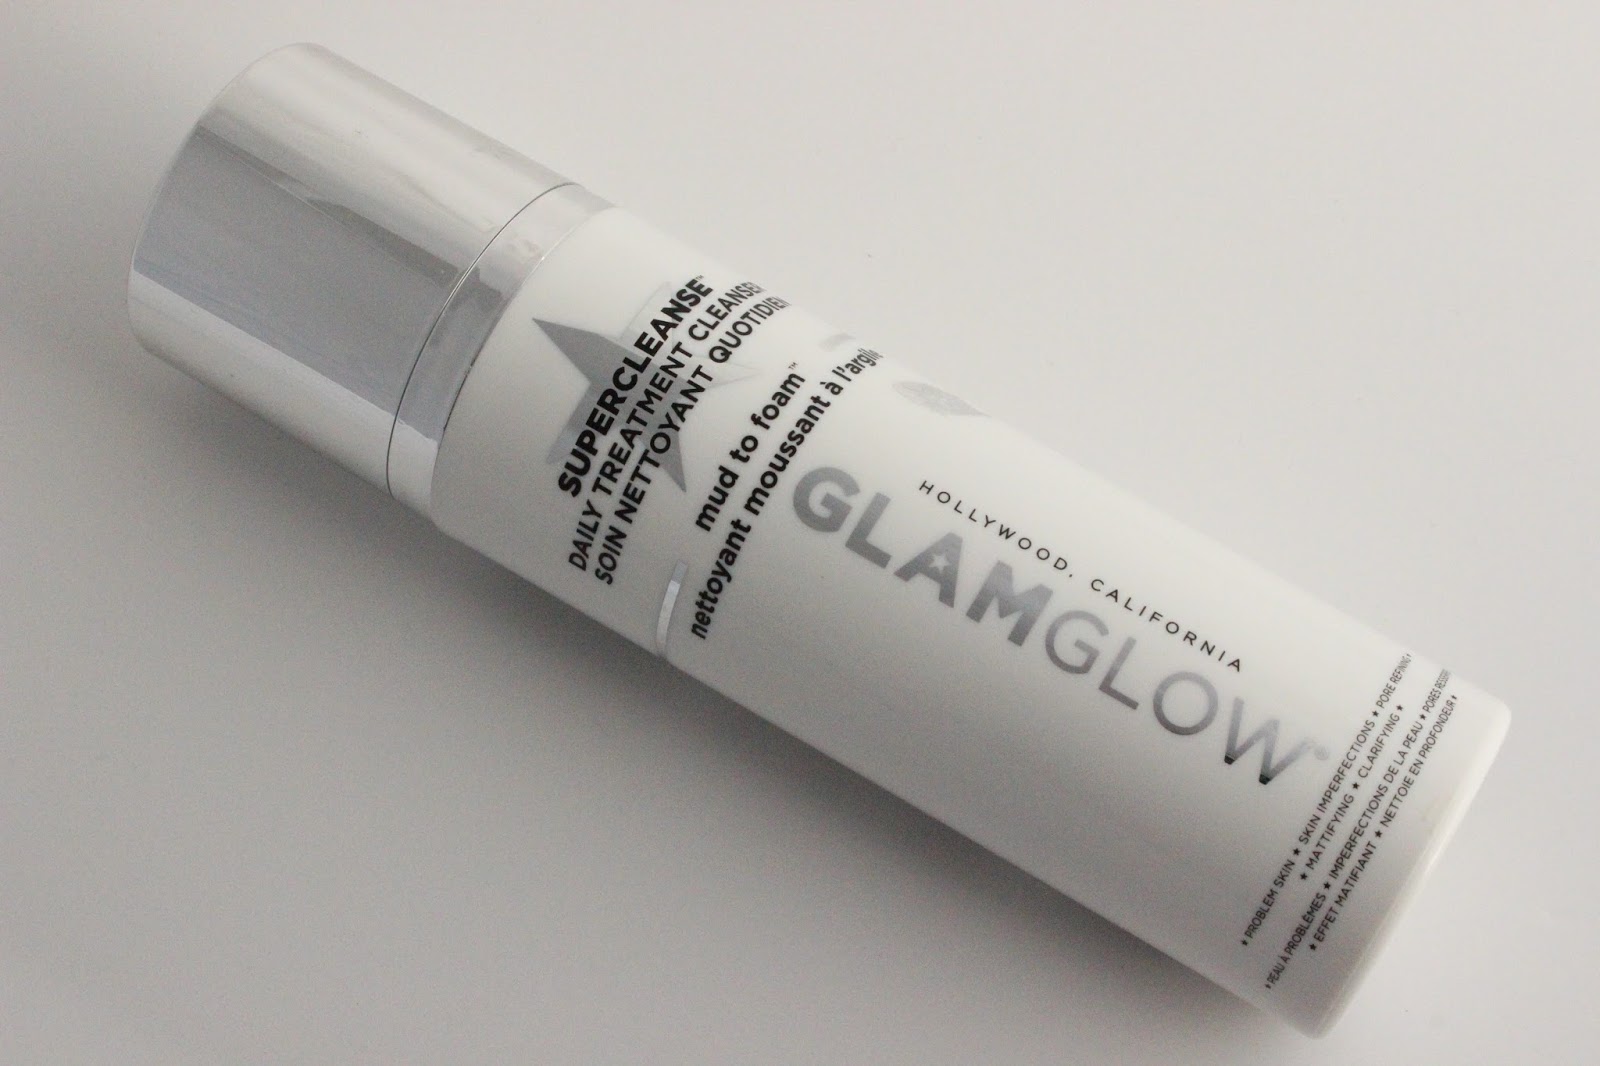 Glamglow Supercleanse Daily Treatment Cleanser Review